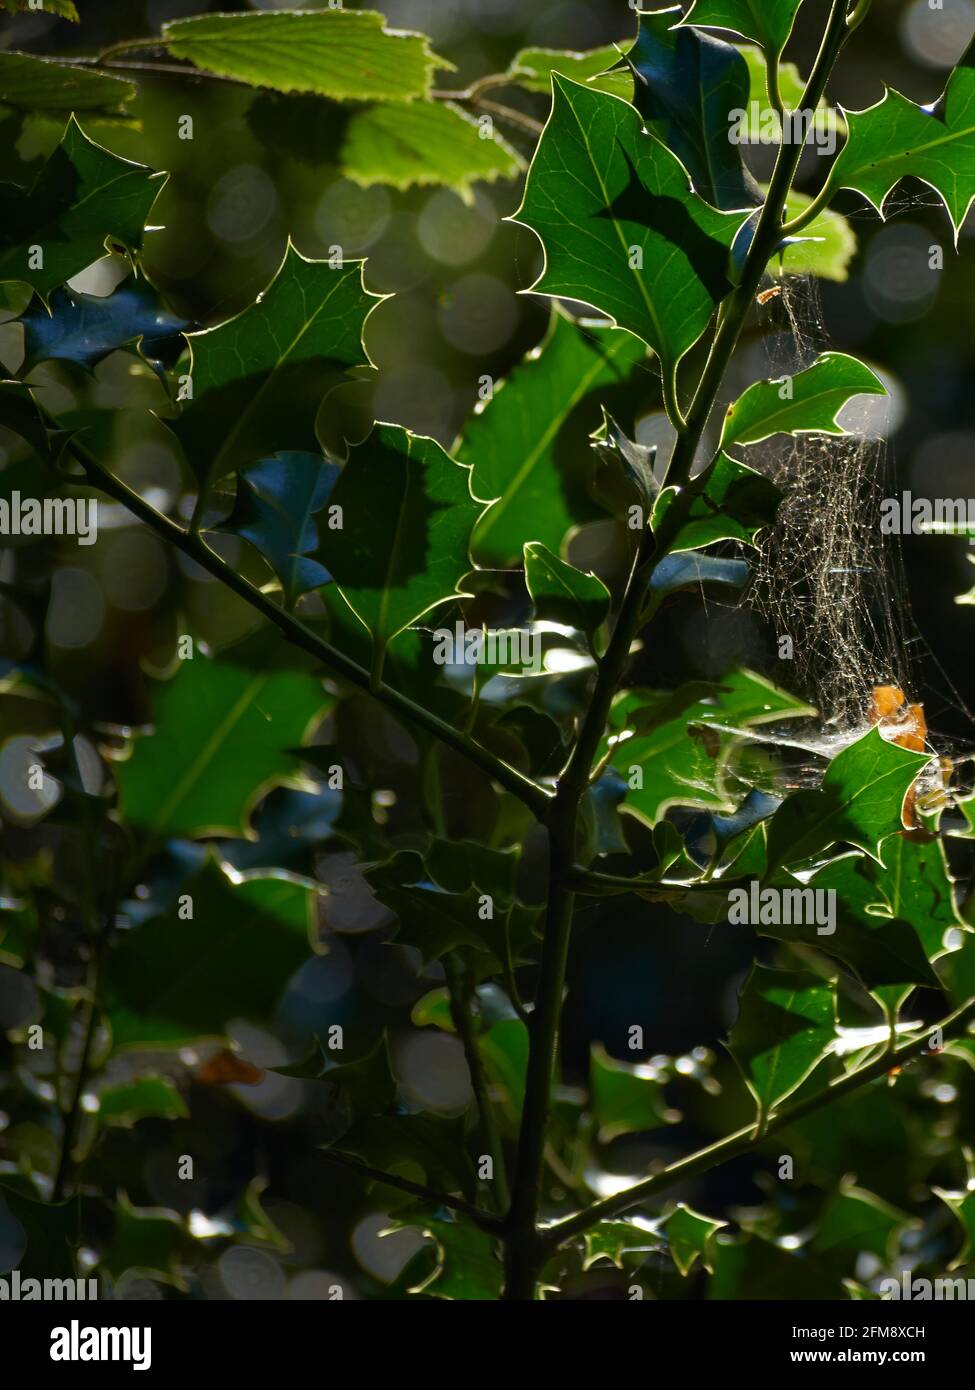 A holly bush with a spider web, light by autumn sunlight. The web has caught one of the first fallen leaves of the season, gold against the evergreen. Stock Photo